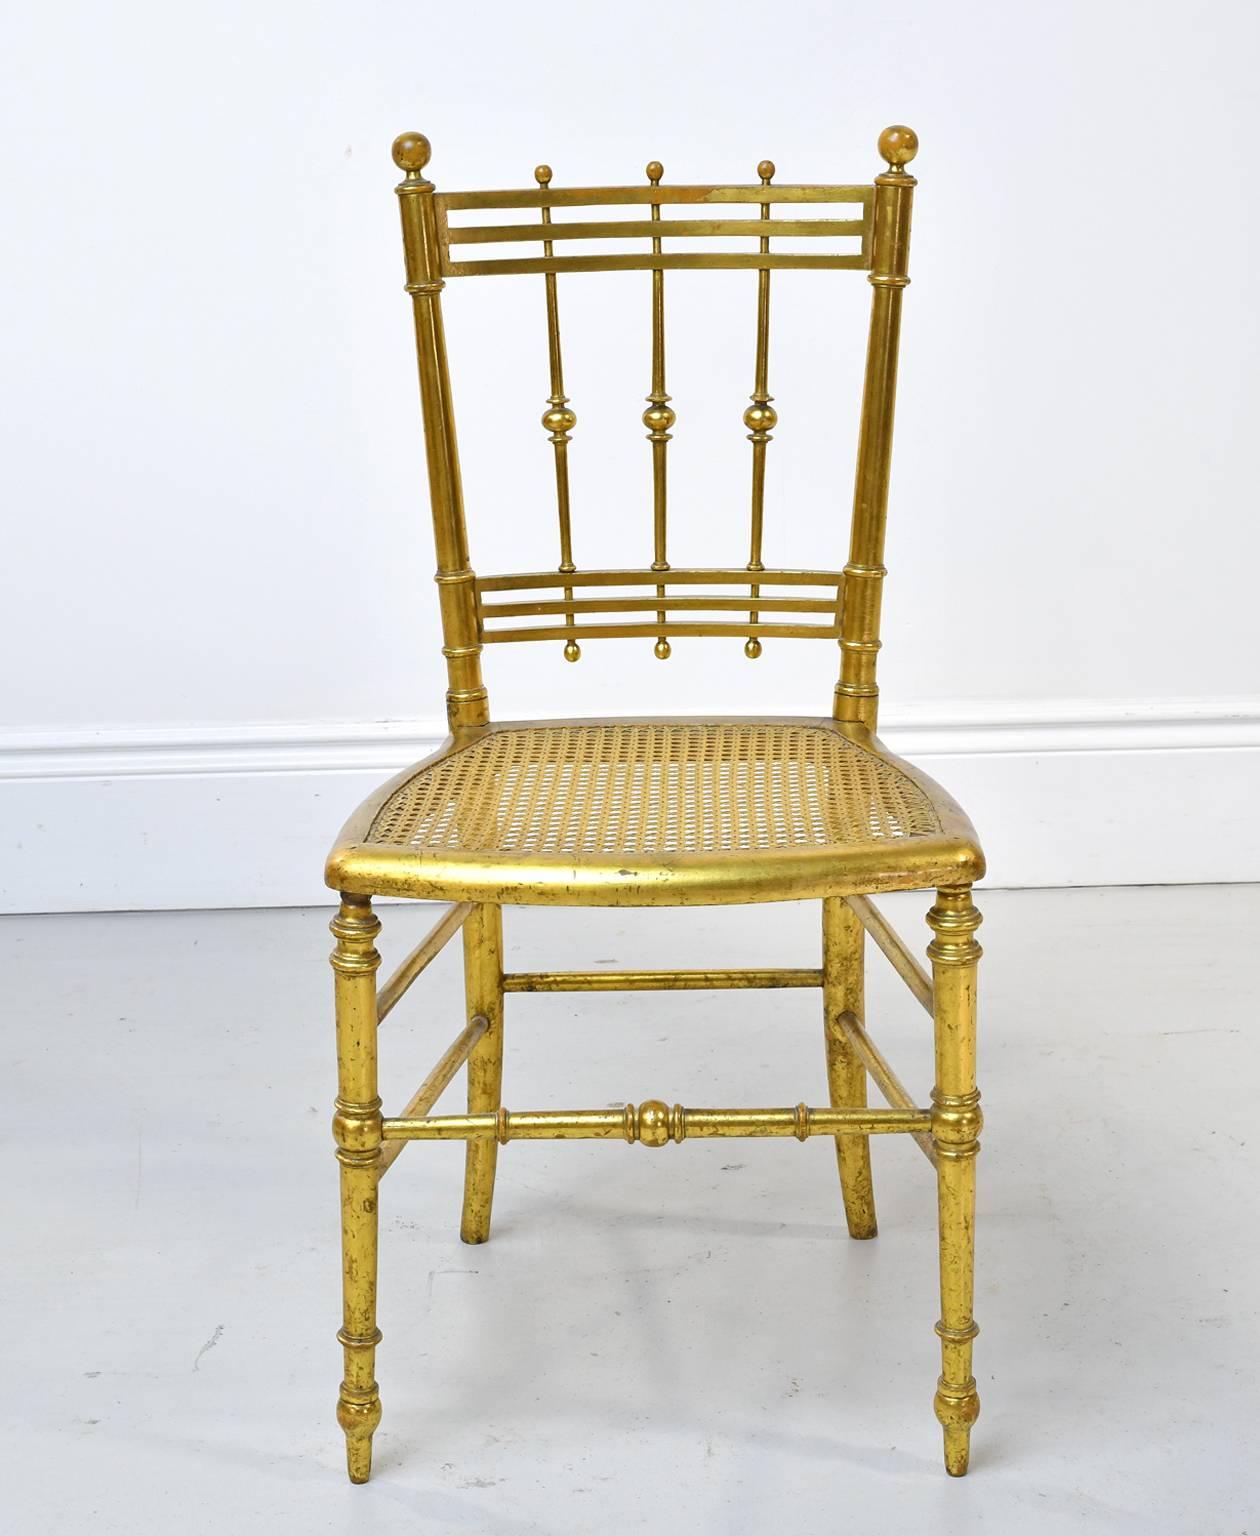 A very lovely  Belle Époque desk or salon chairs in gilt-wood (gold leaf applied to wood) with vertical & horizontal slats along back, ball finials, turned front legs & stretchers, and woven cane seat. France, circa 1910.
Wonderful in a small